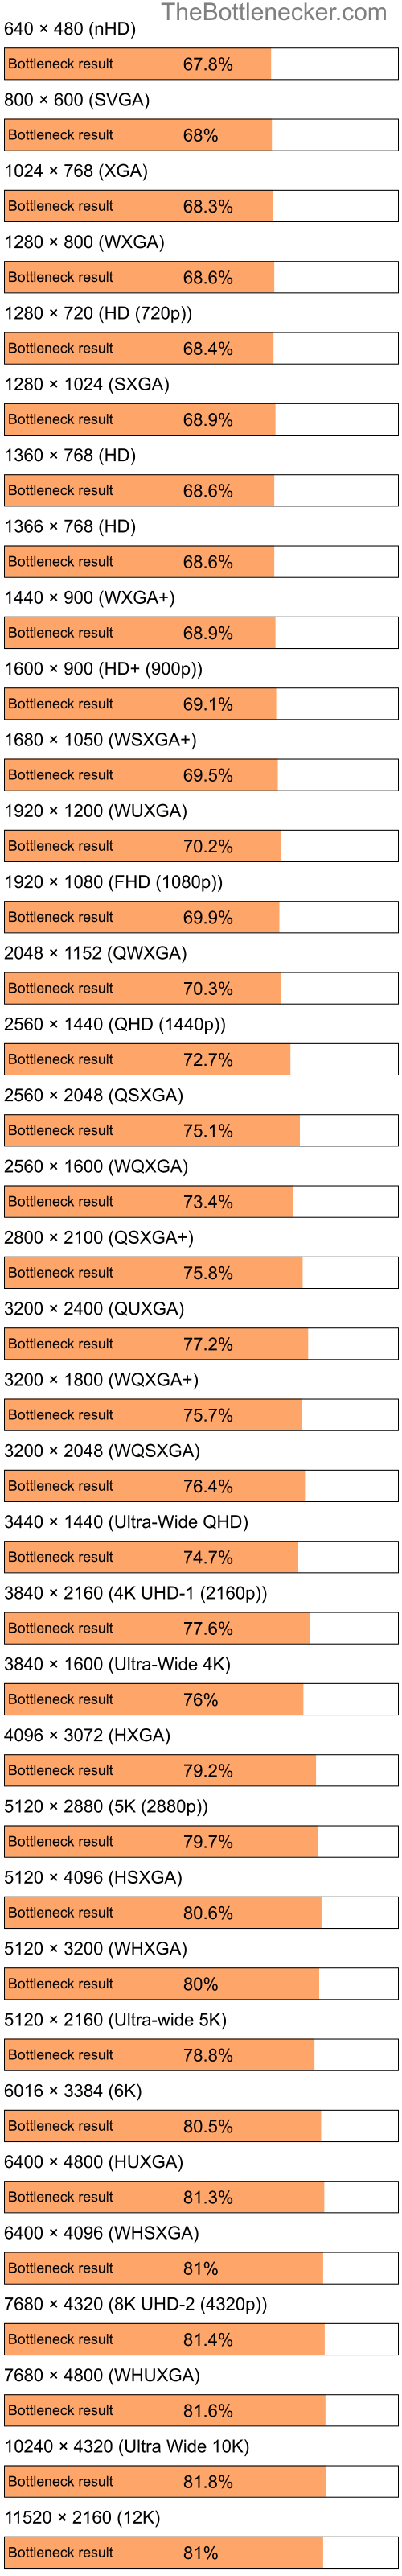 Bottleneck results by resolution for Intel Celeron and NVIDIA GeForce 6800 in Graphic Card Intense Tasks